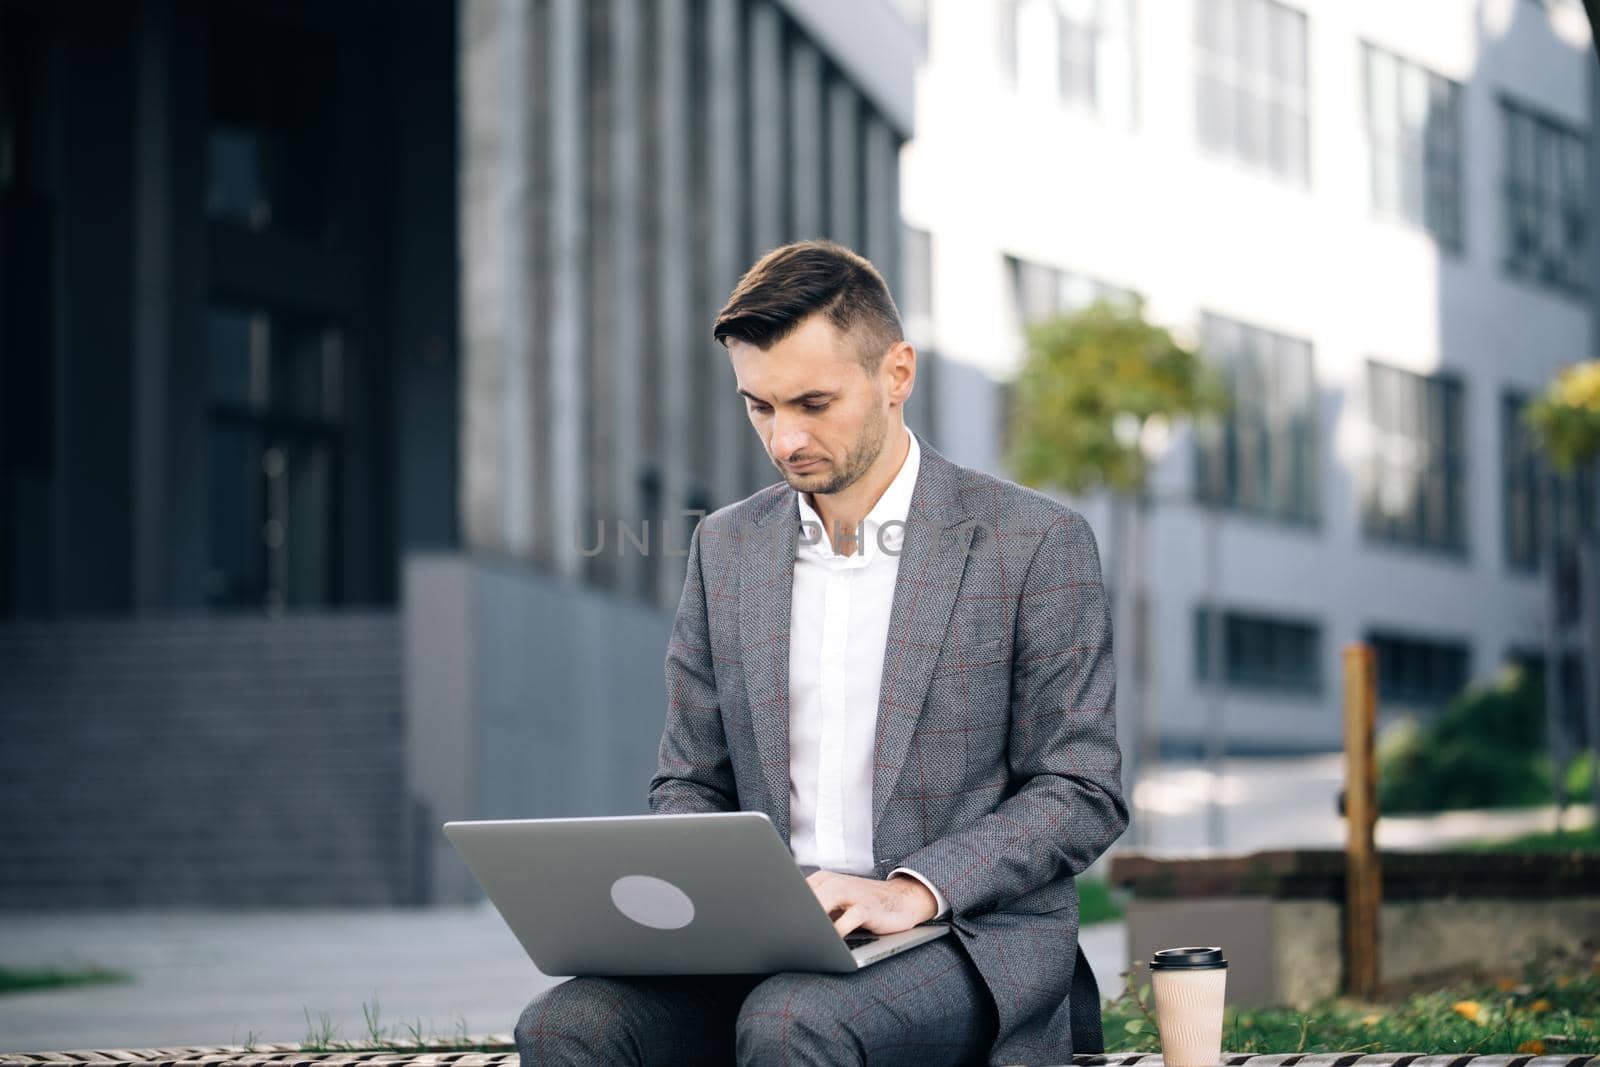 Young businessman in the city sits on bench, takes a laptop and works. Businessman typing on laptop computer outdoor. Man in suit working with laptop while sitting on bench. Remote work concept.